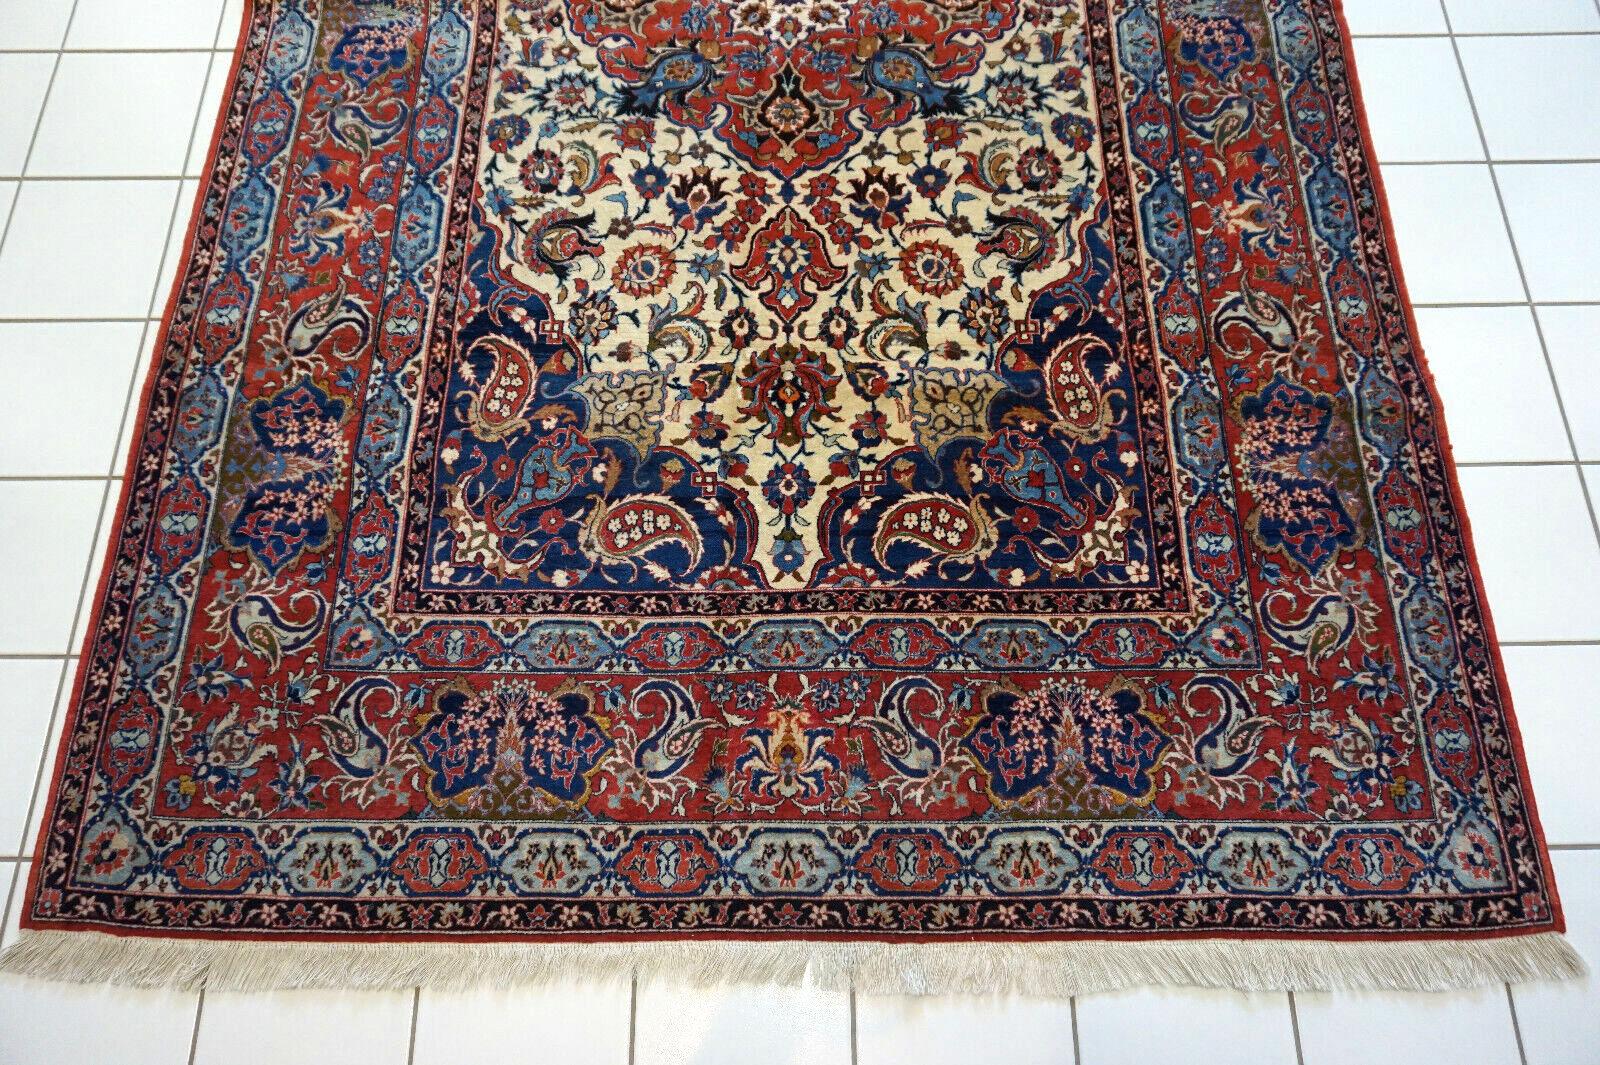 Handmade Antique Persian Style Isfahan Rug 4.5' x 7.7', 1920s - 1D53 For Sale 5